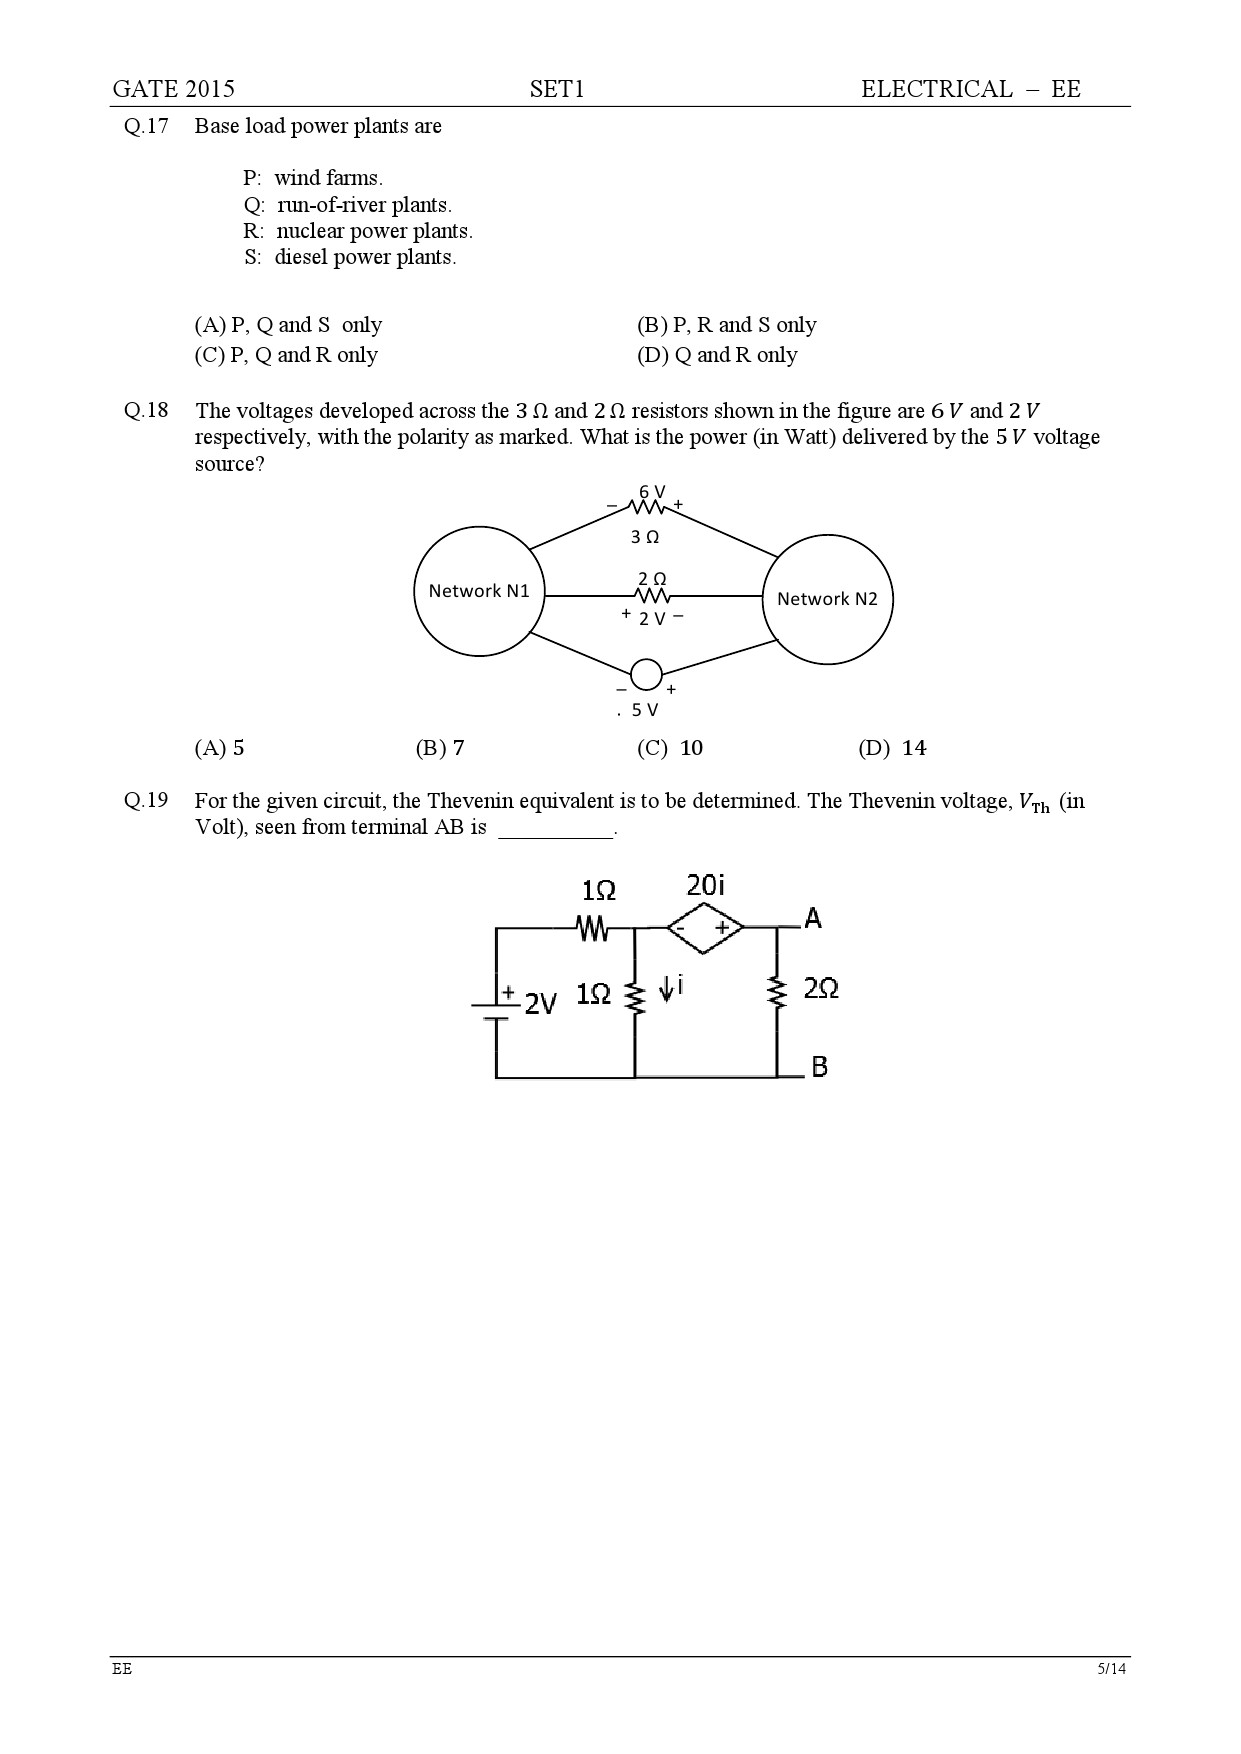 GATE Exam Question Paper 2015 Electrical Engineering Set 1 5